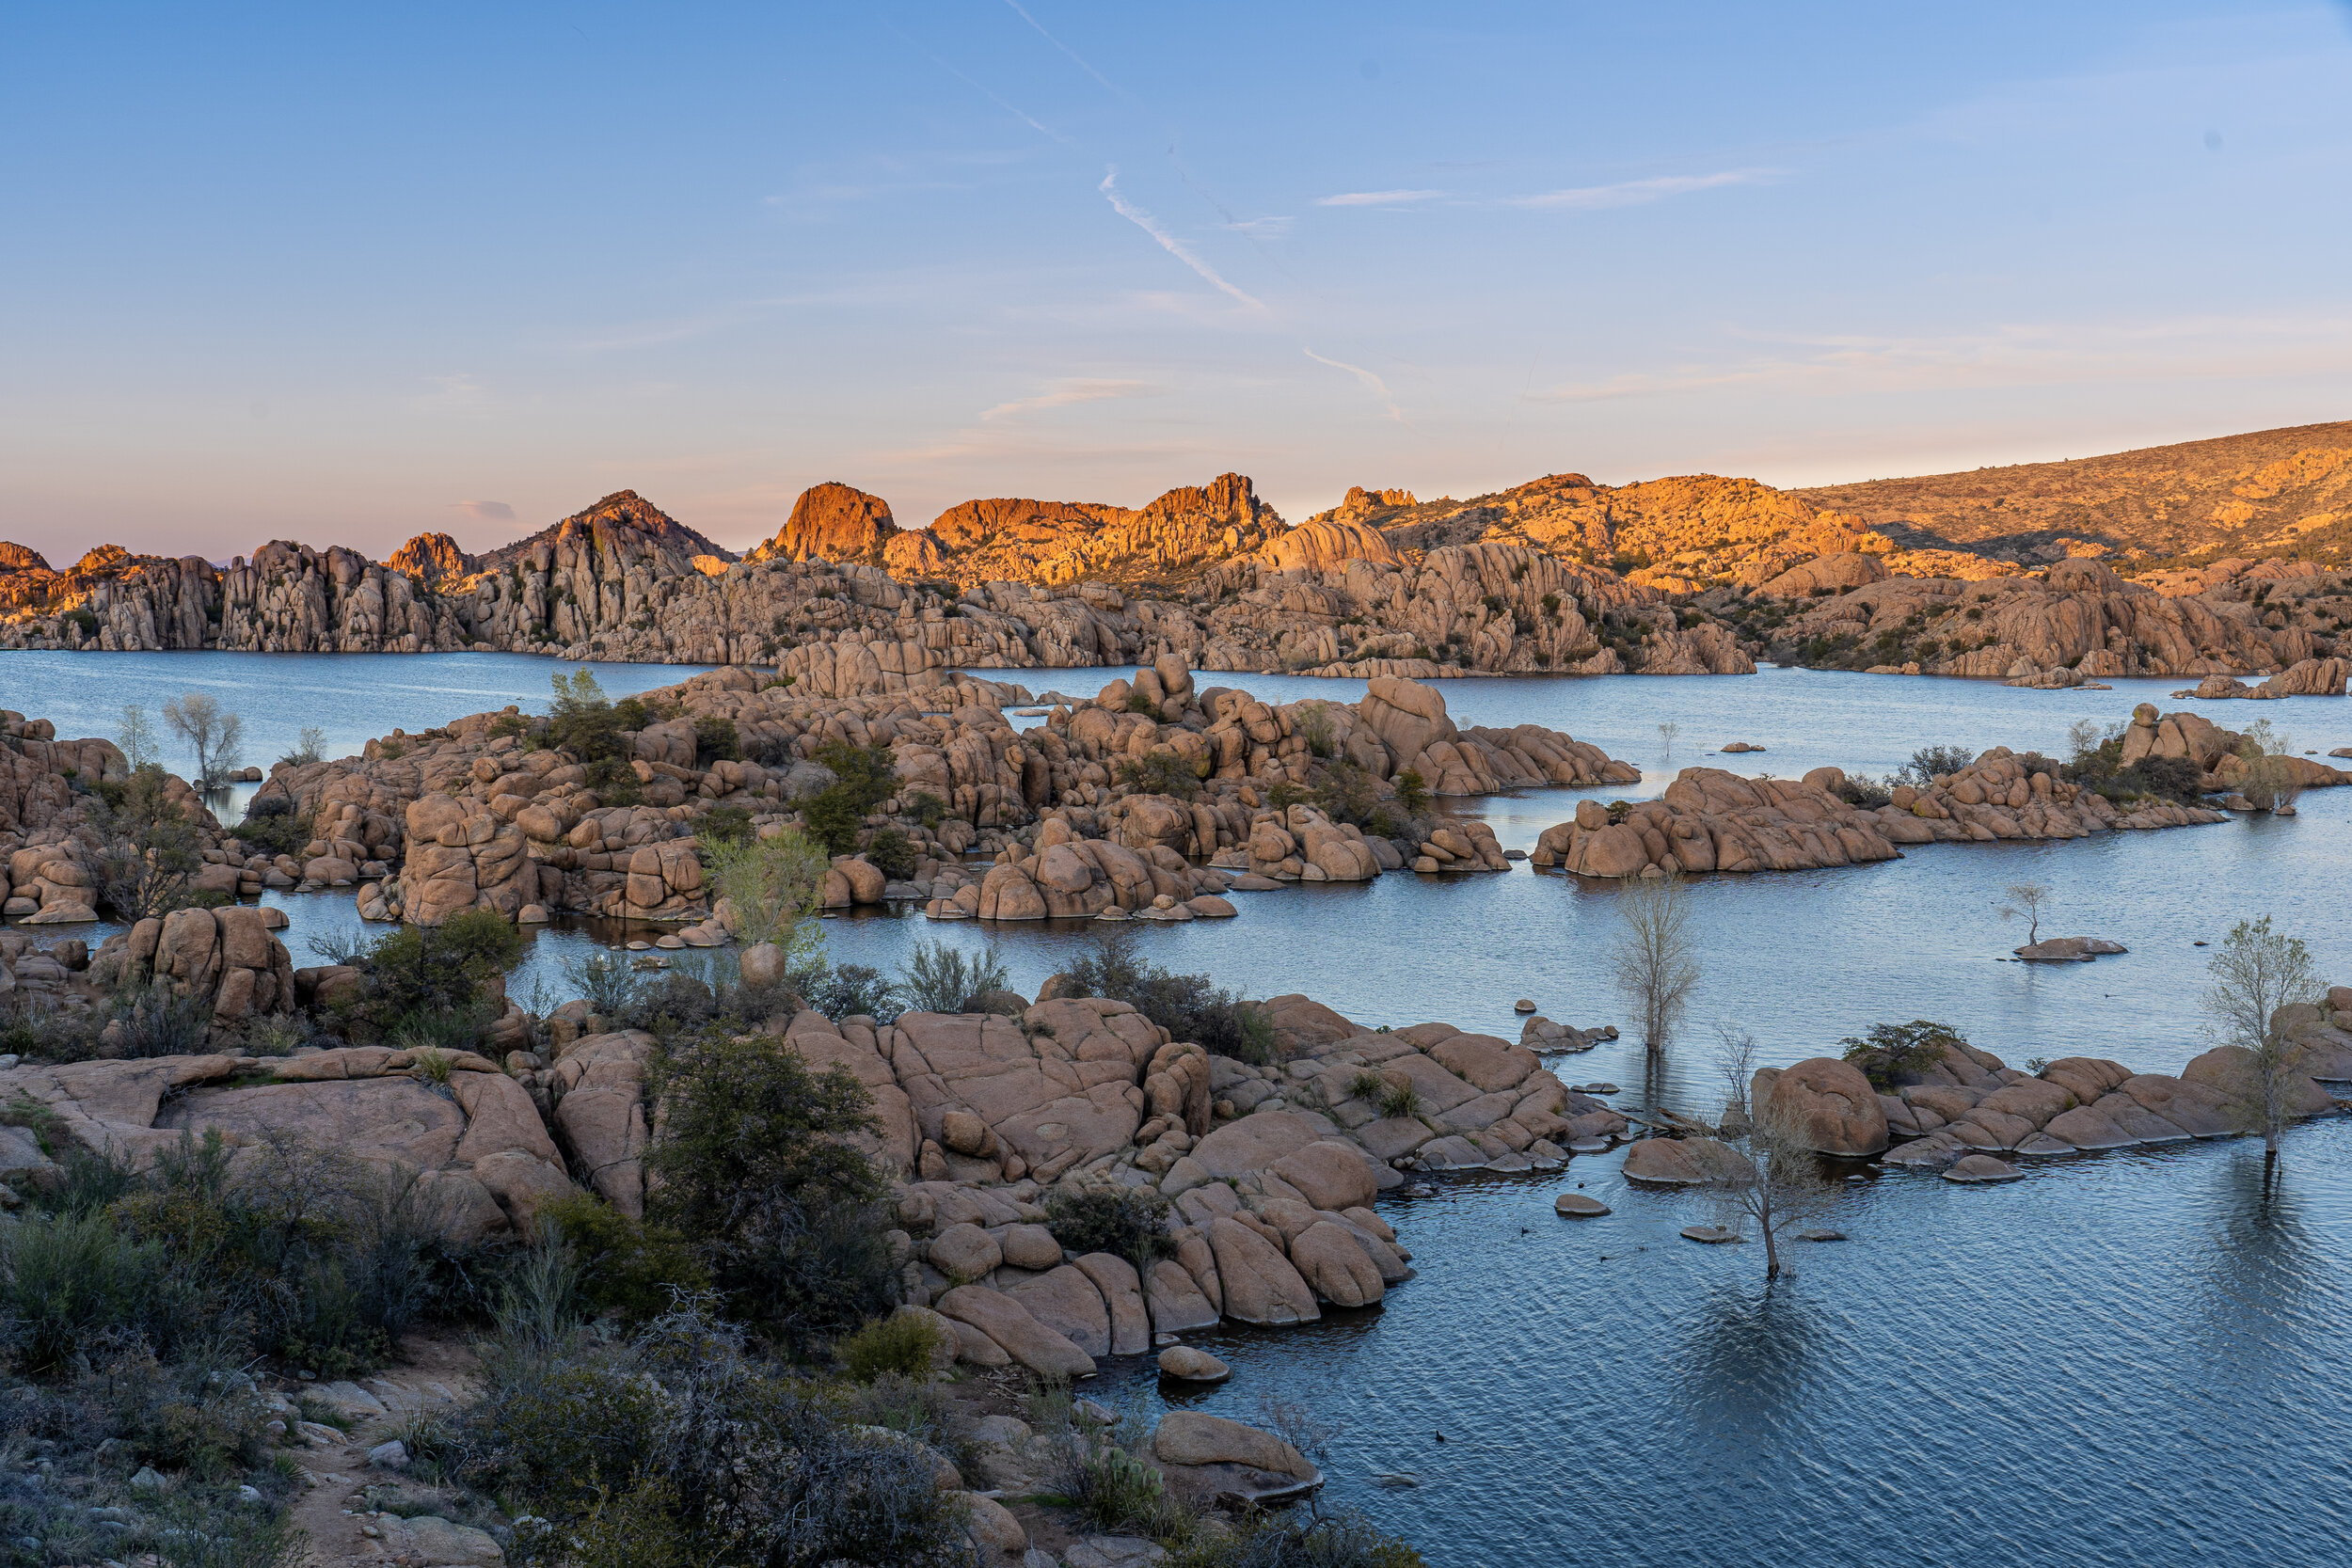  I’ve always appreciated pictures of Watson Lake. When I realized we were staying only 45 minutes away I decided to make a day of hiking and photographing these unique rock structures before leaving Arizona. After spending several days here, I think 